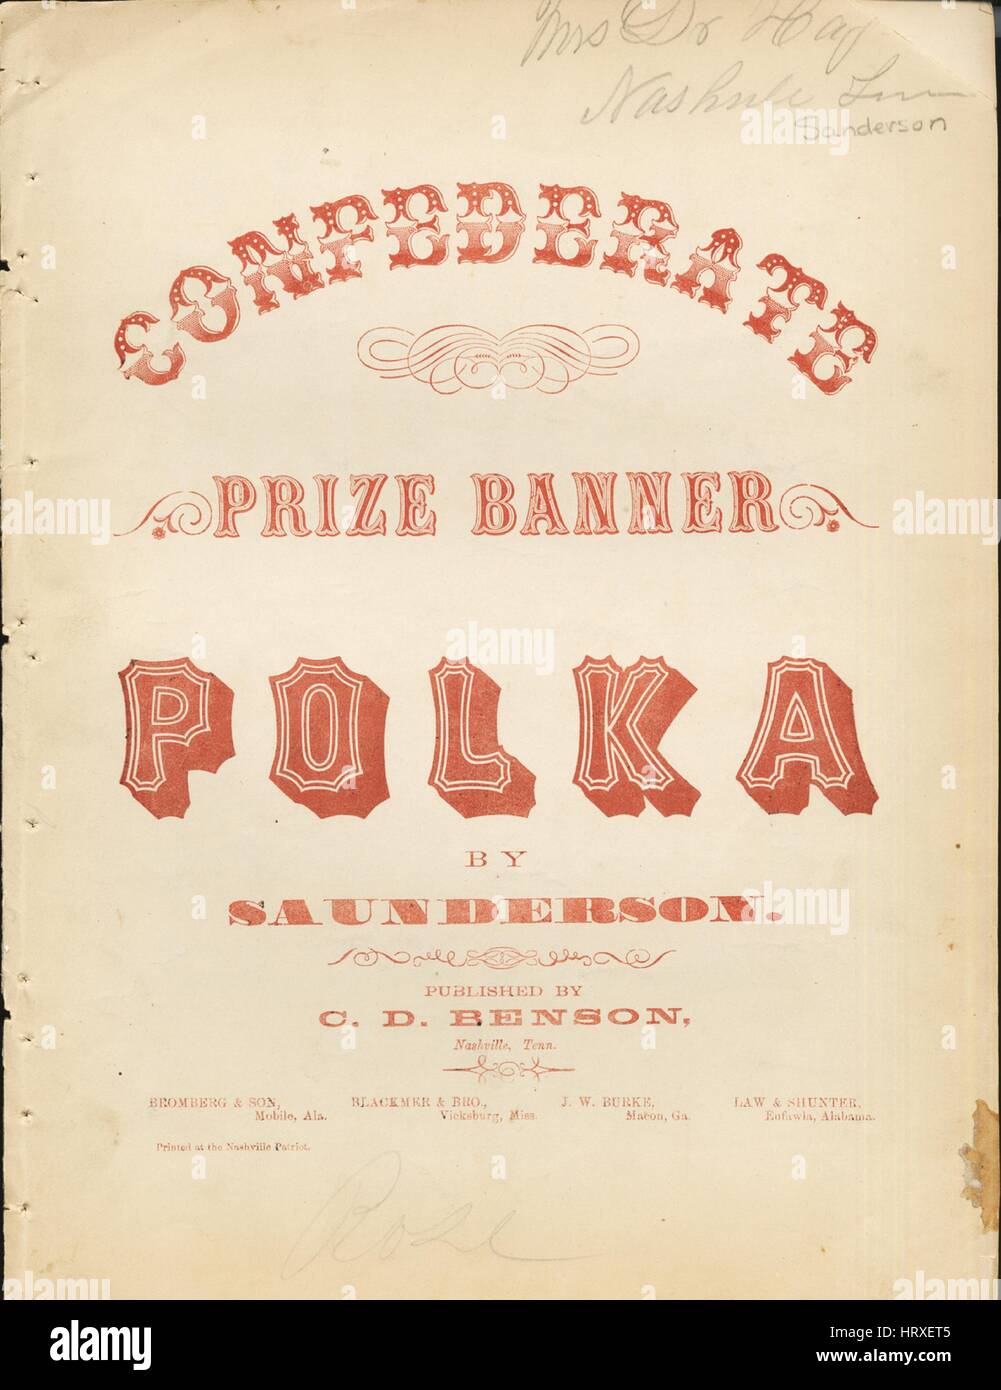 Sheet music cover image of the song 'Confederate Prize Banner Polka', with original authorship notes reading 'By Saunderson', 1860. The publisher is listed as 'C.D. Benson', the form of composition is 'da capo', the instrumentation is 'piano', the first line reads 'None', and the illustration artist is listed as 'None'. Stock Photo